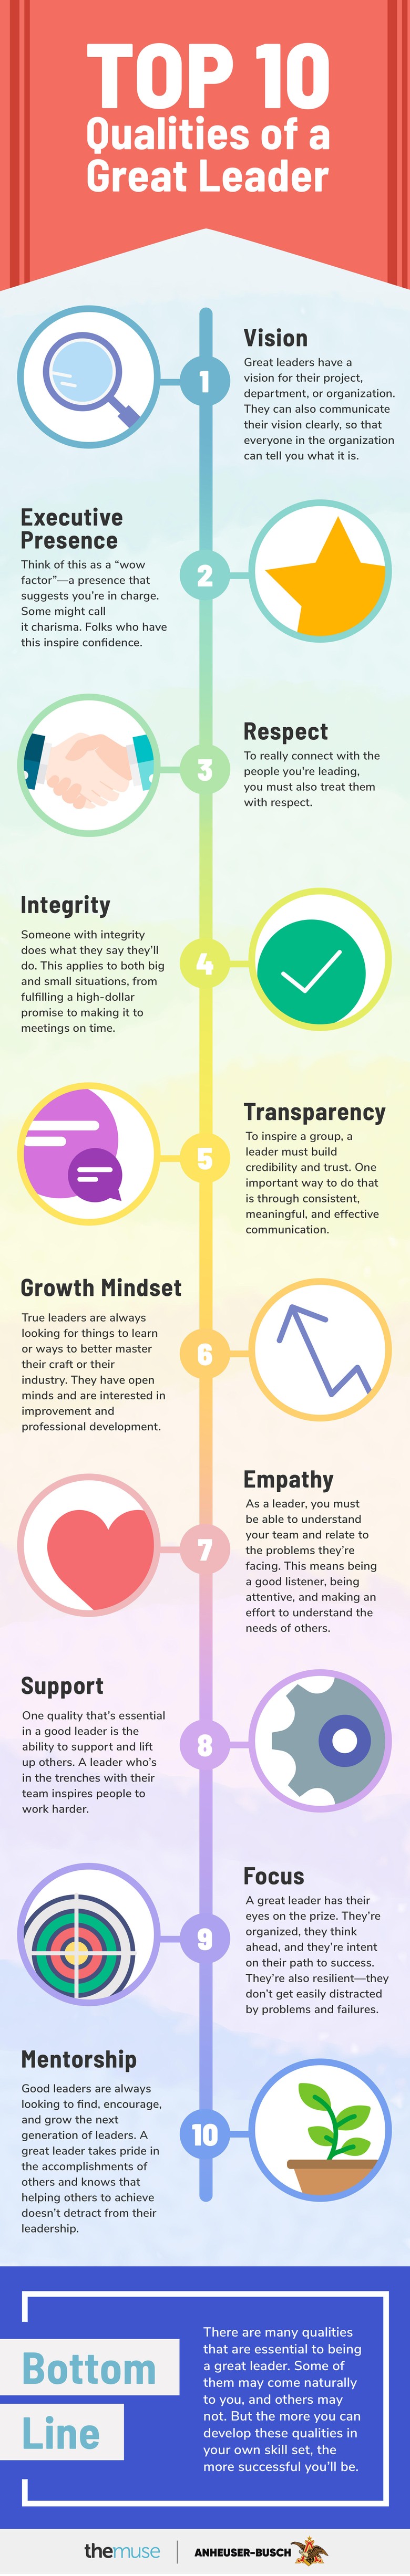 infographic of the top 10 qualities of a great leader